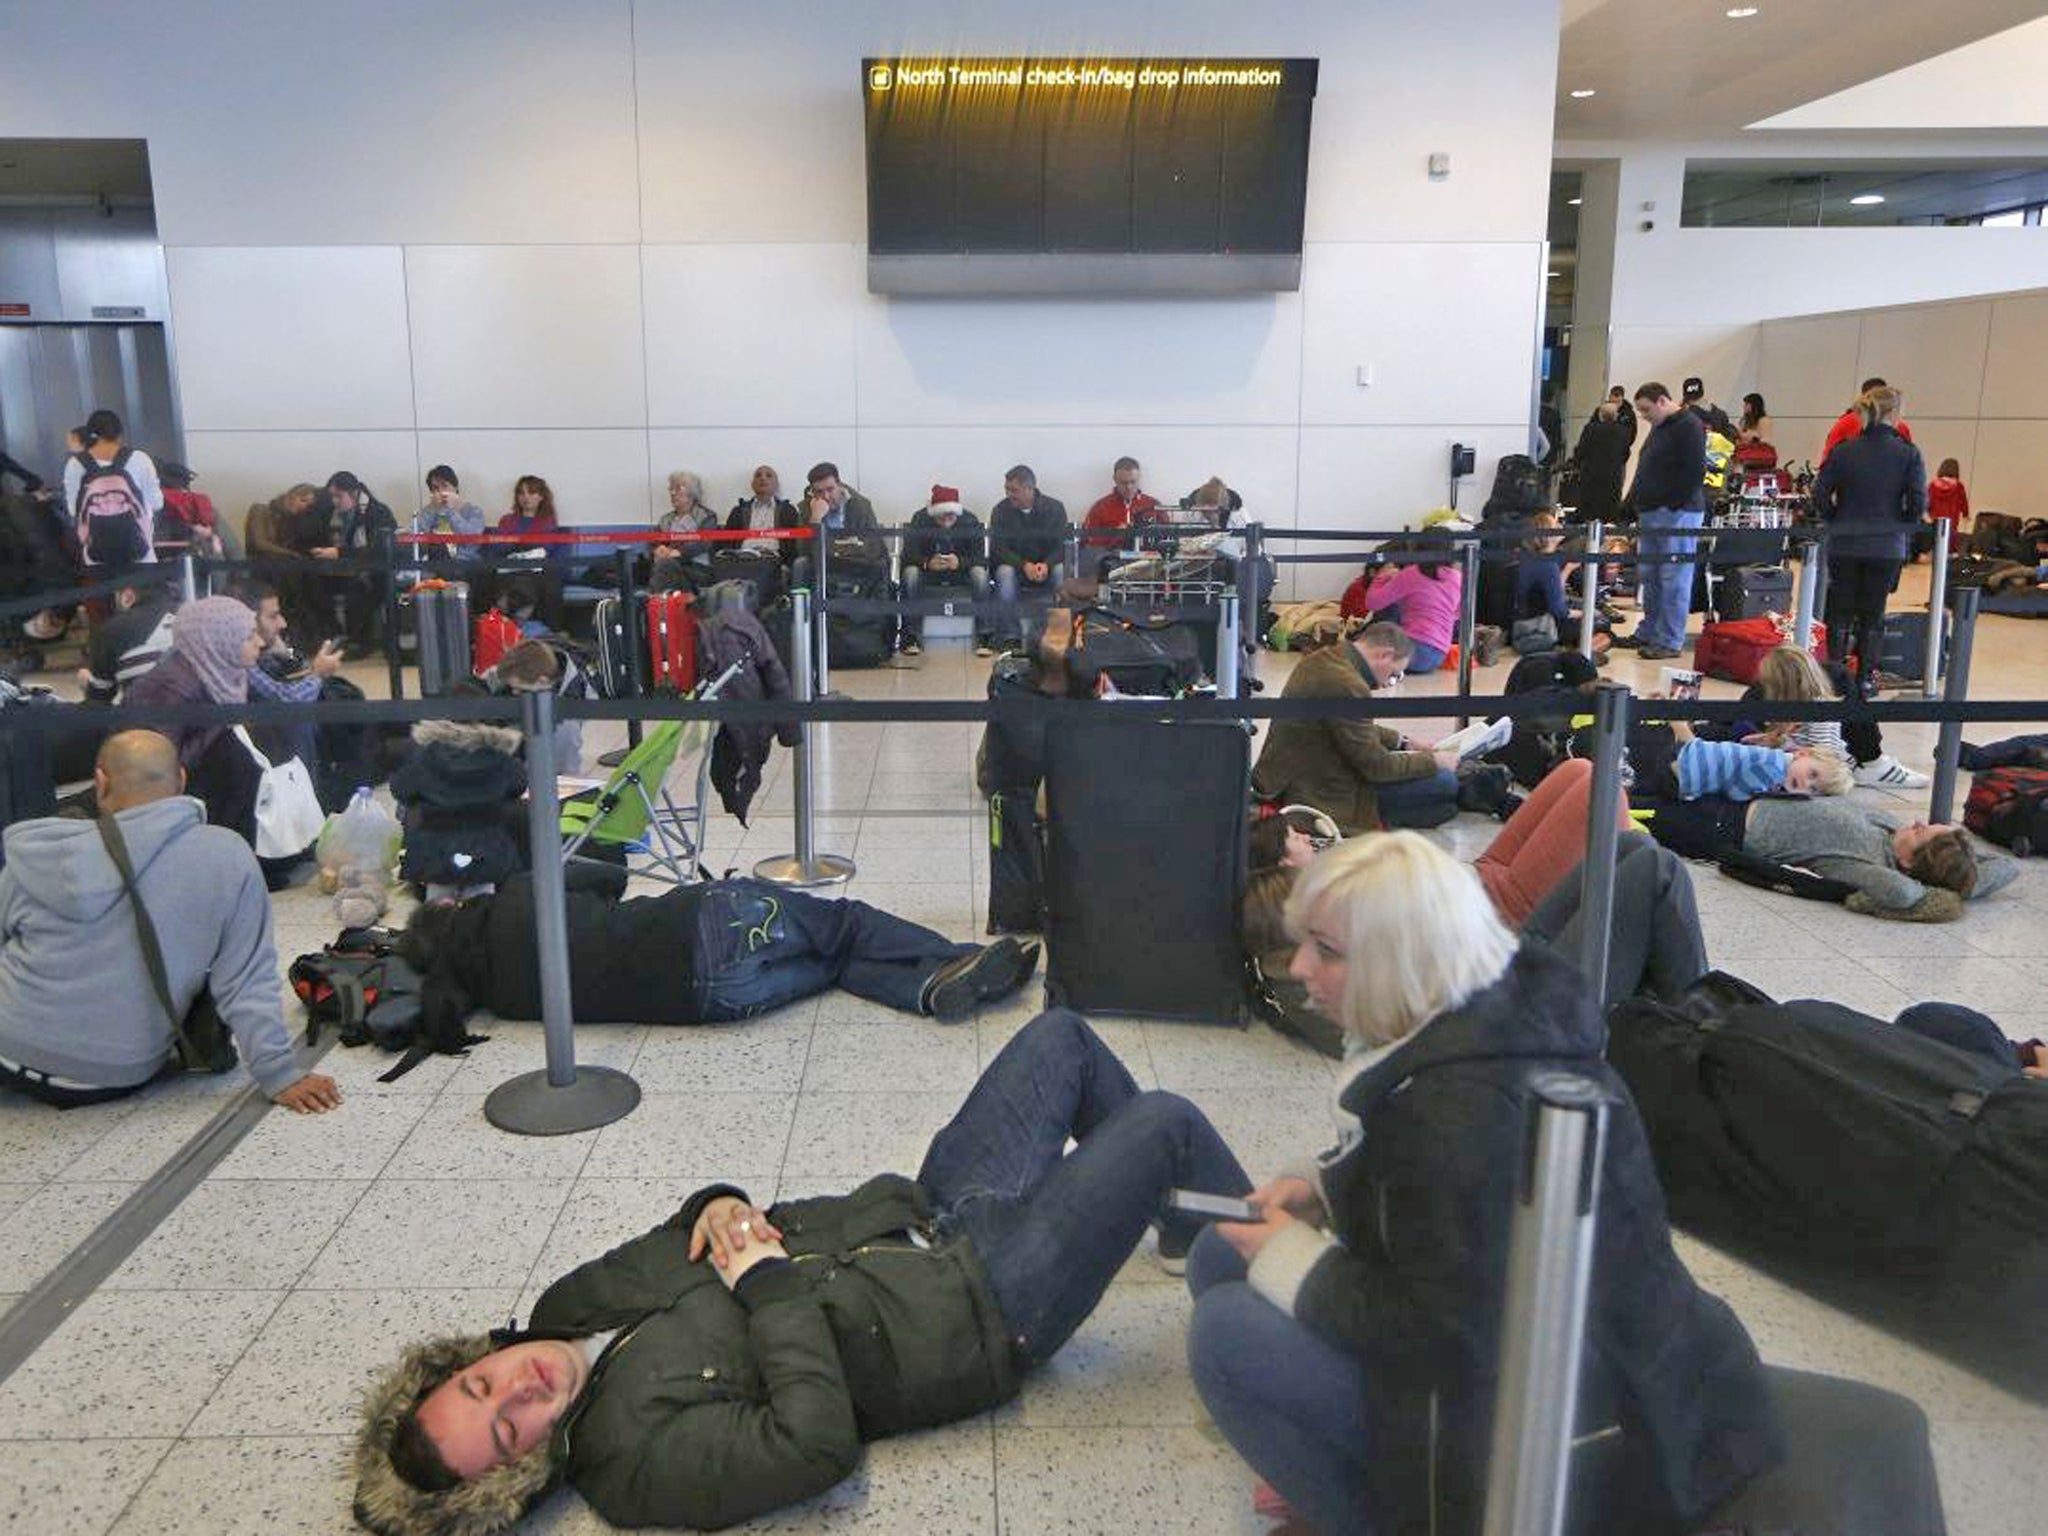 Many flights were cancelled at Gatwick on Christmas Eve last year after a power outage caused by flooding